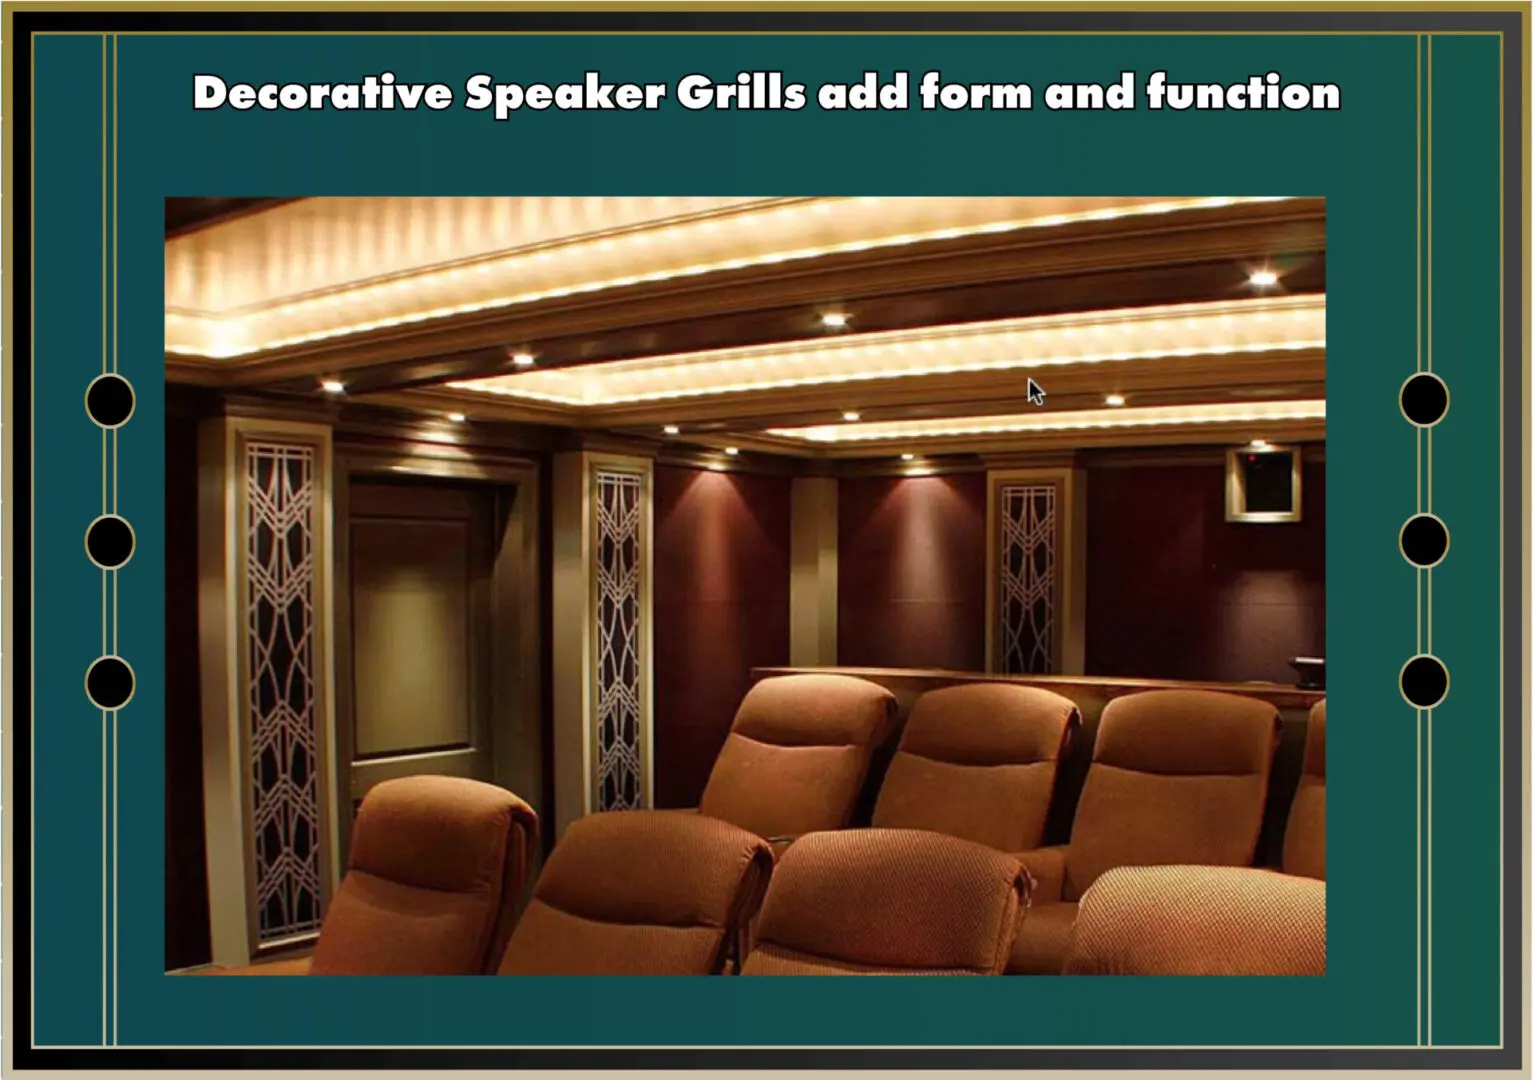 Decorative Speaker Grills adding form and function